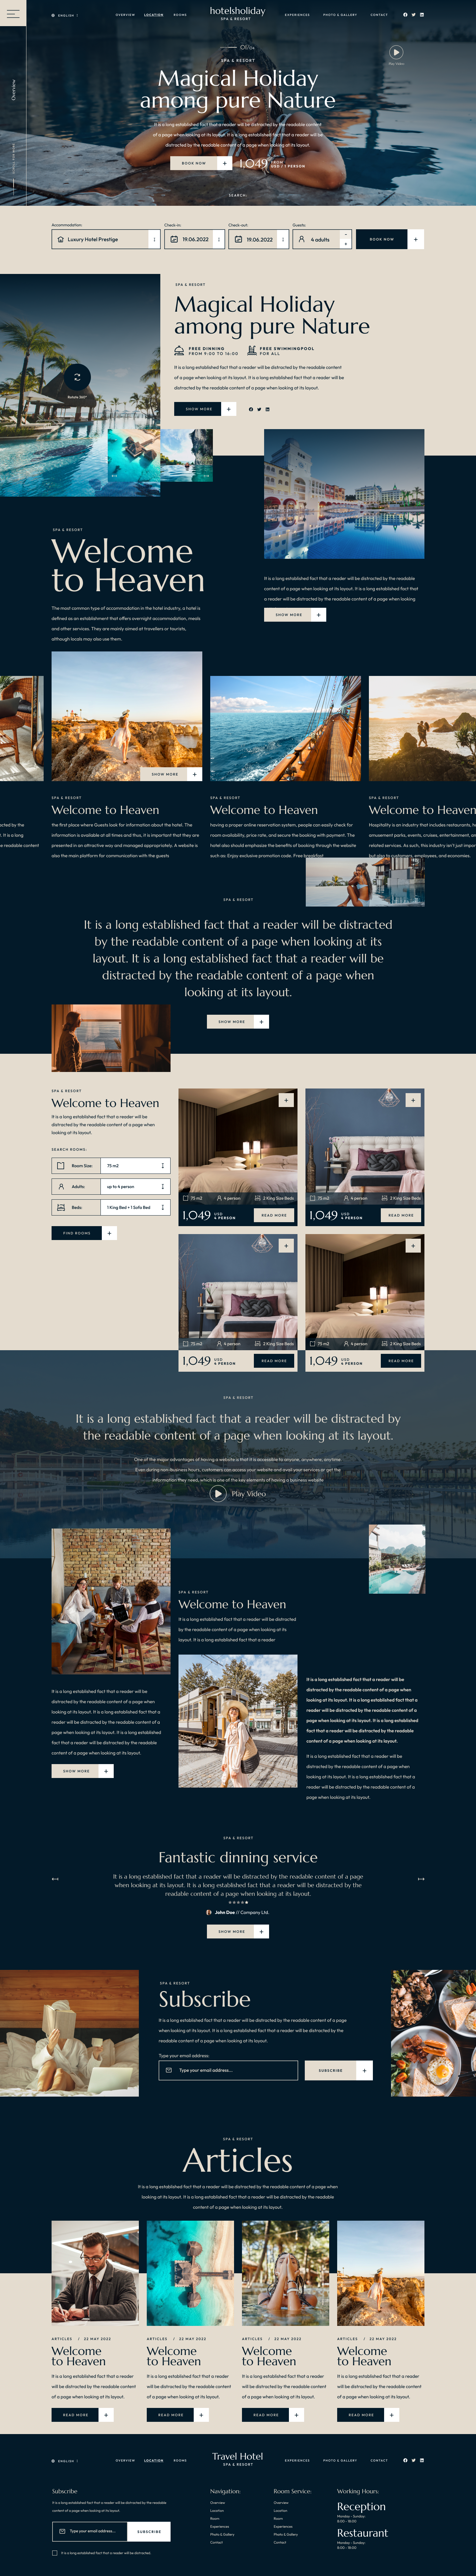 Hotels Holiday Opencart Theme-WorkDo